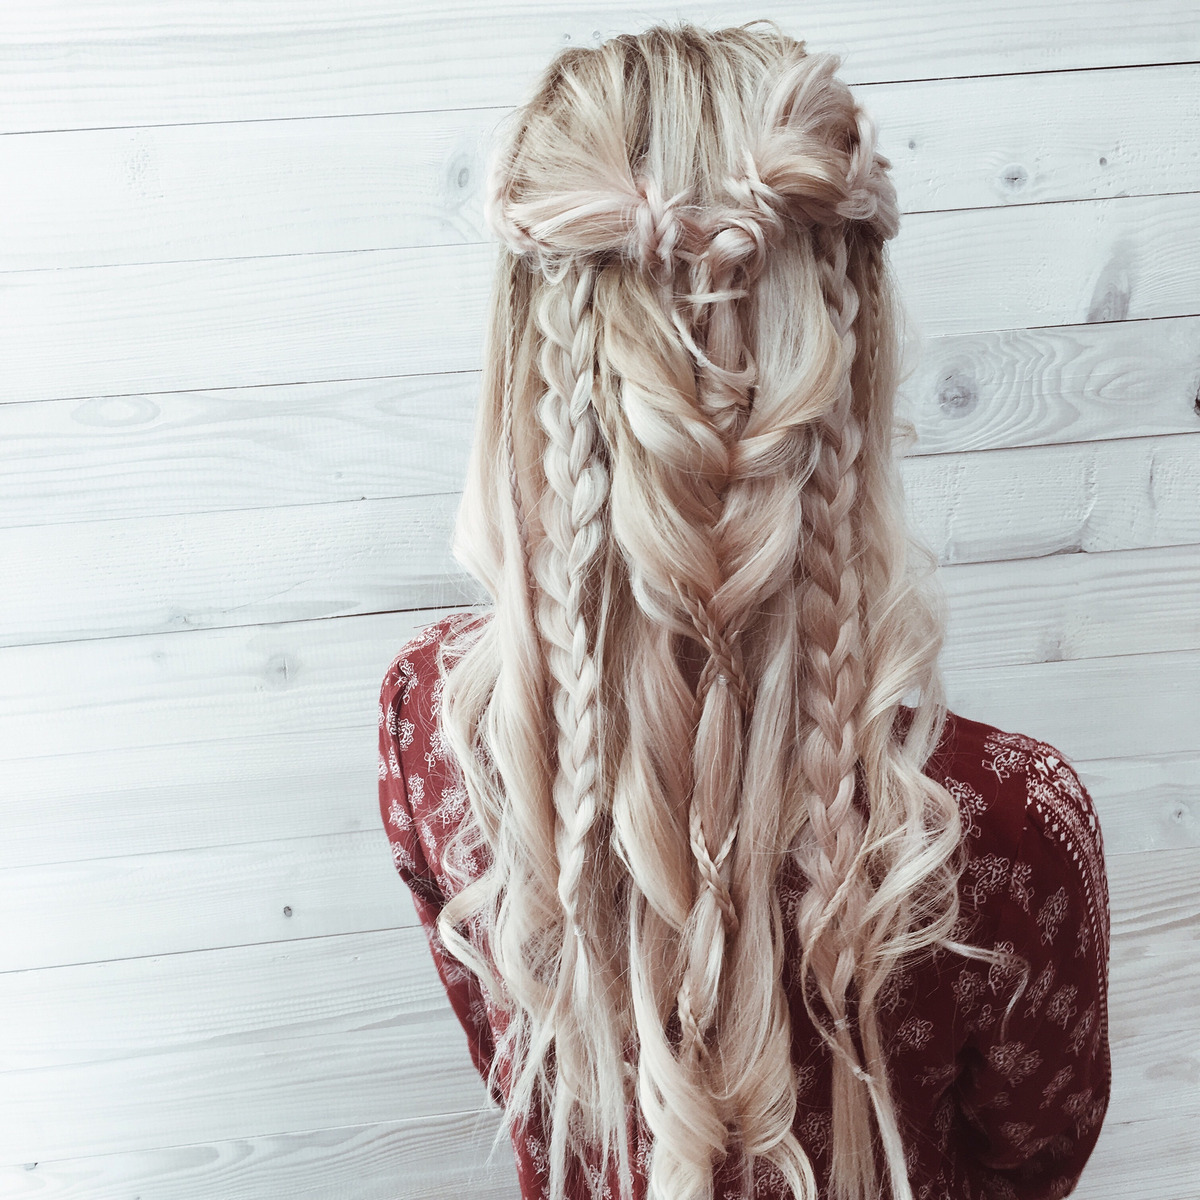 Braided hairstyle is so beautiful 